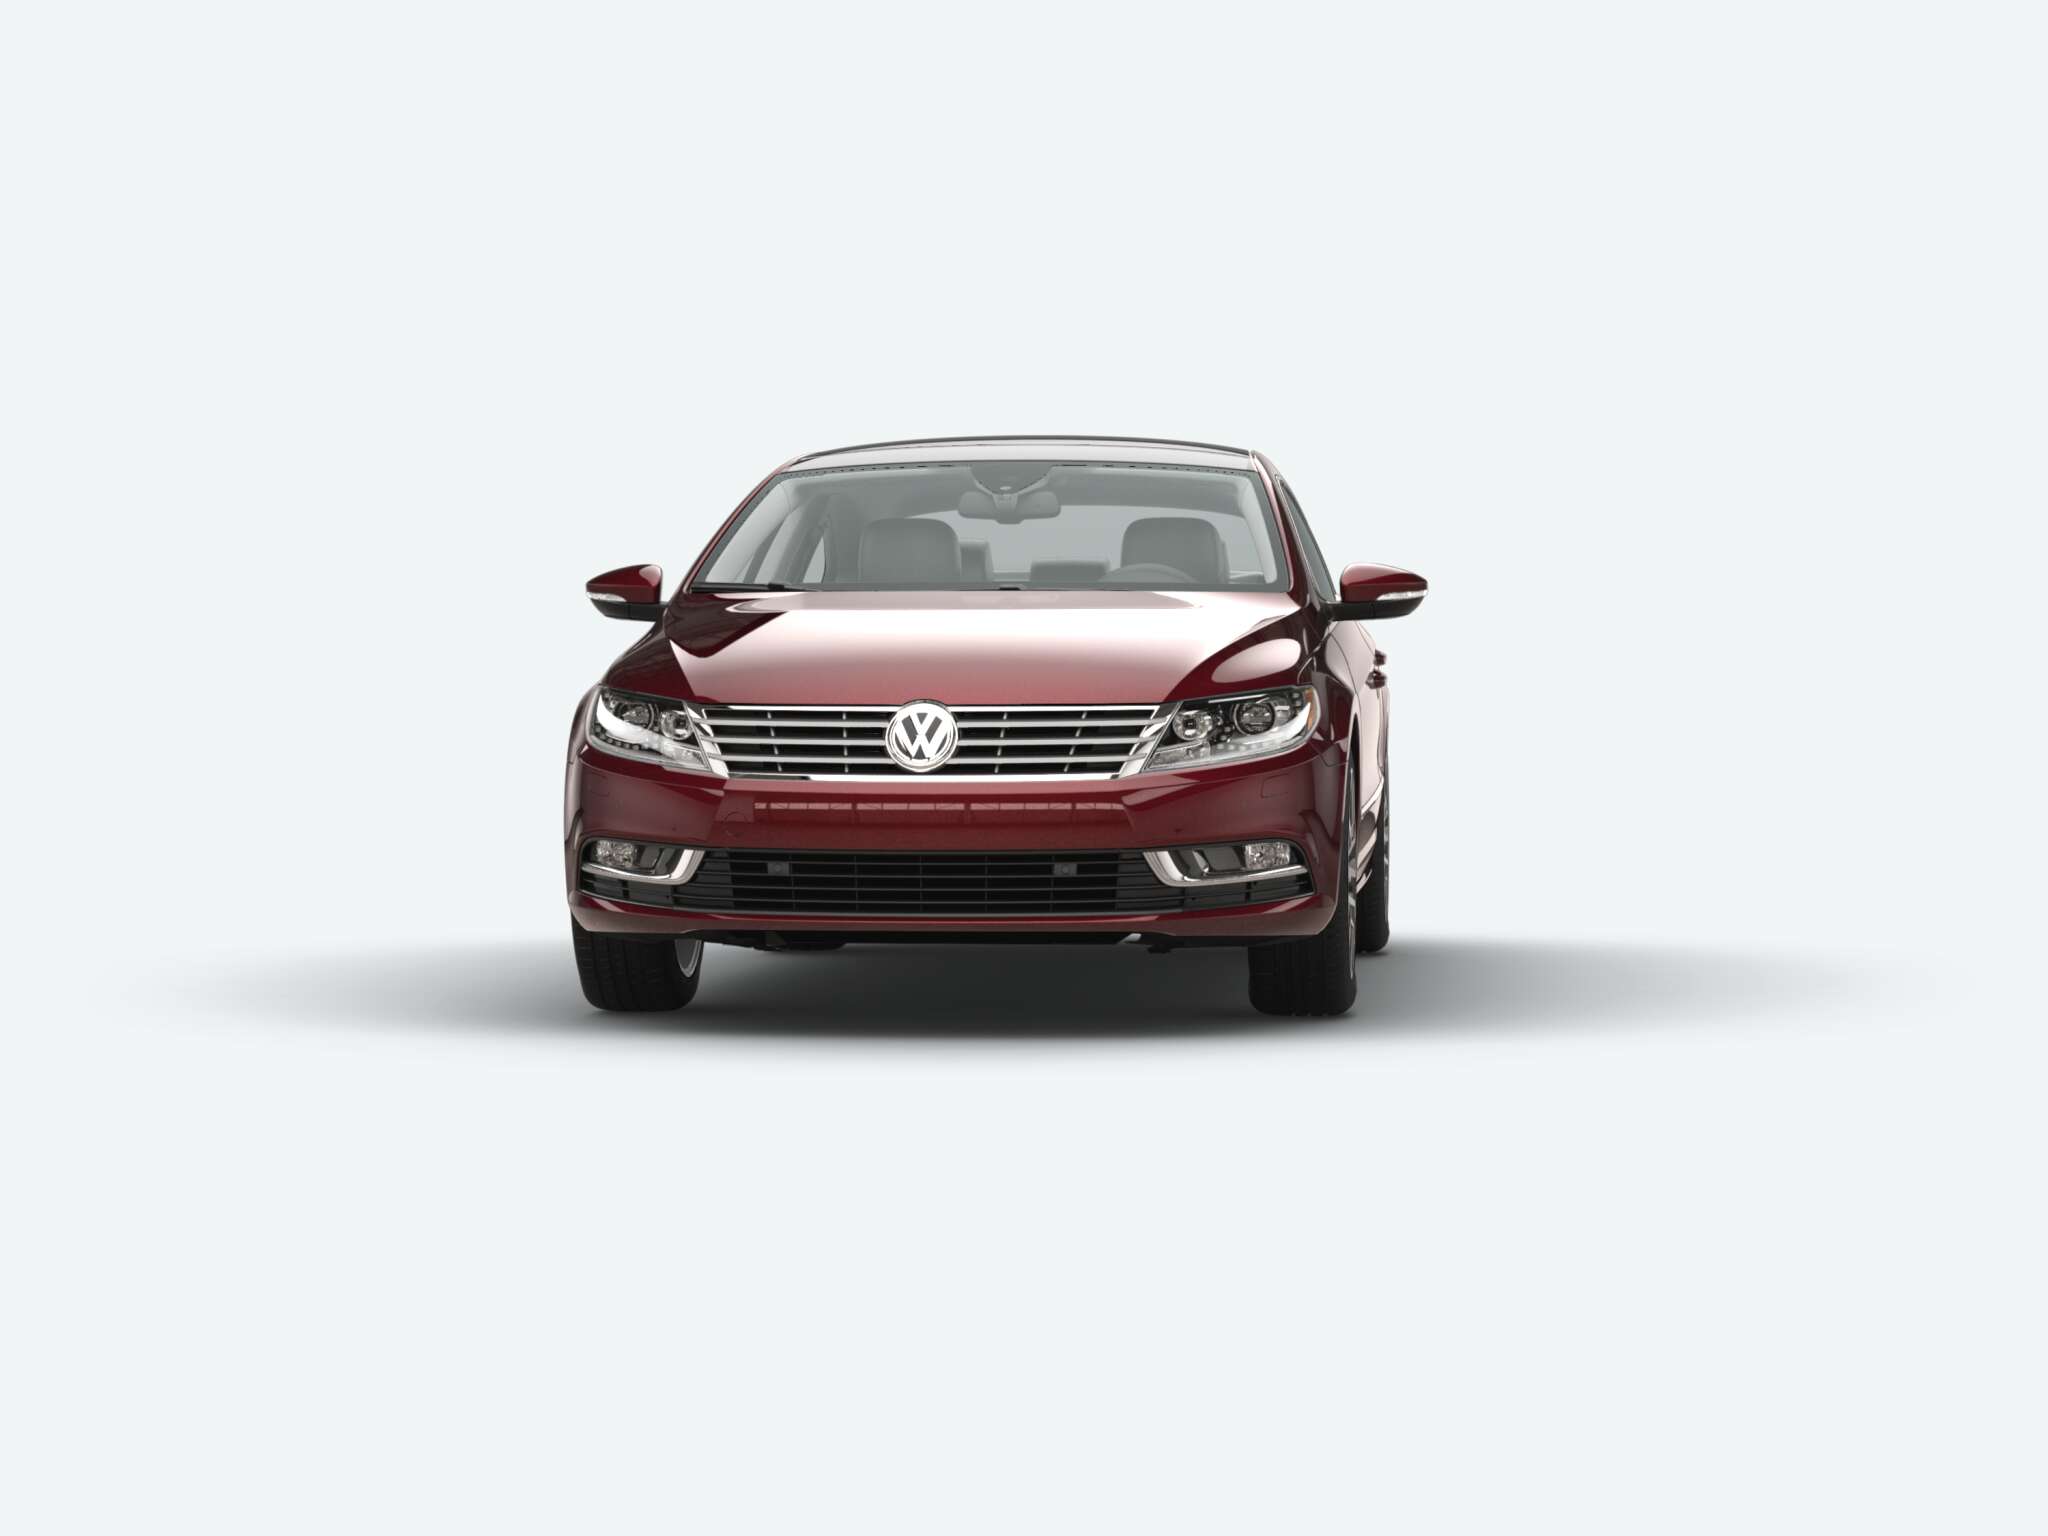 Volkswagen CC V6 Executive 4MOTION front view